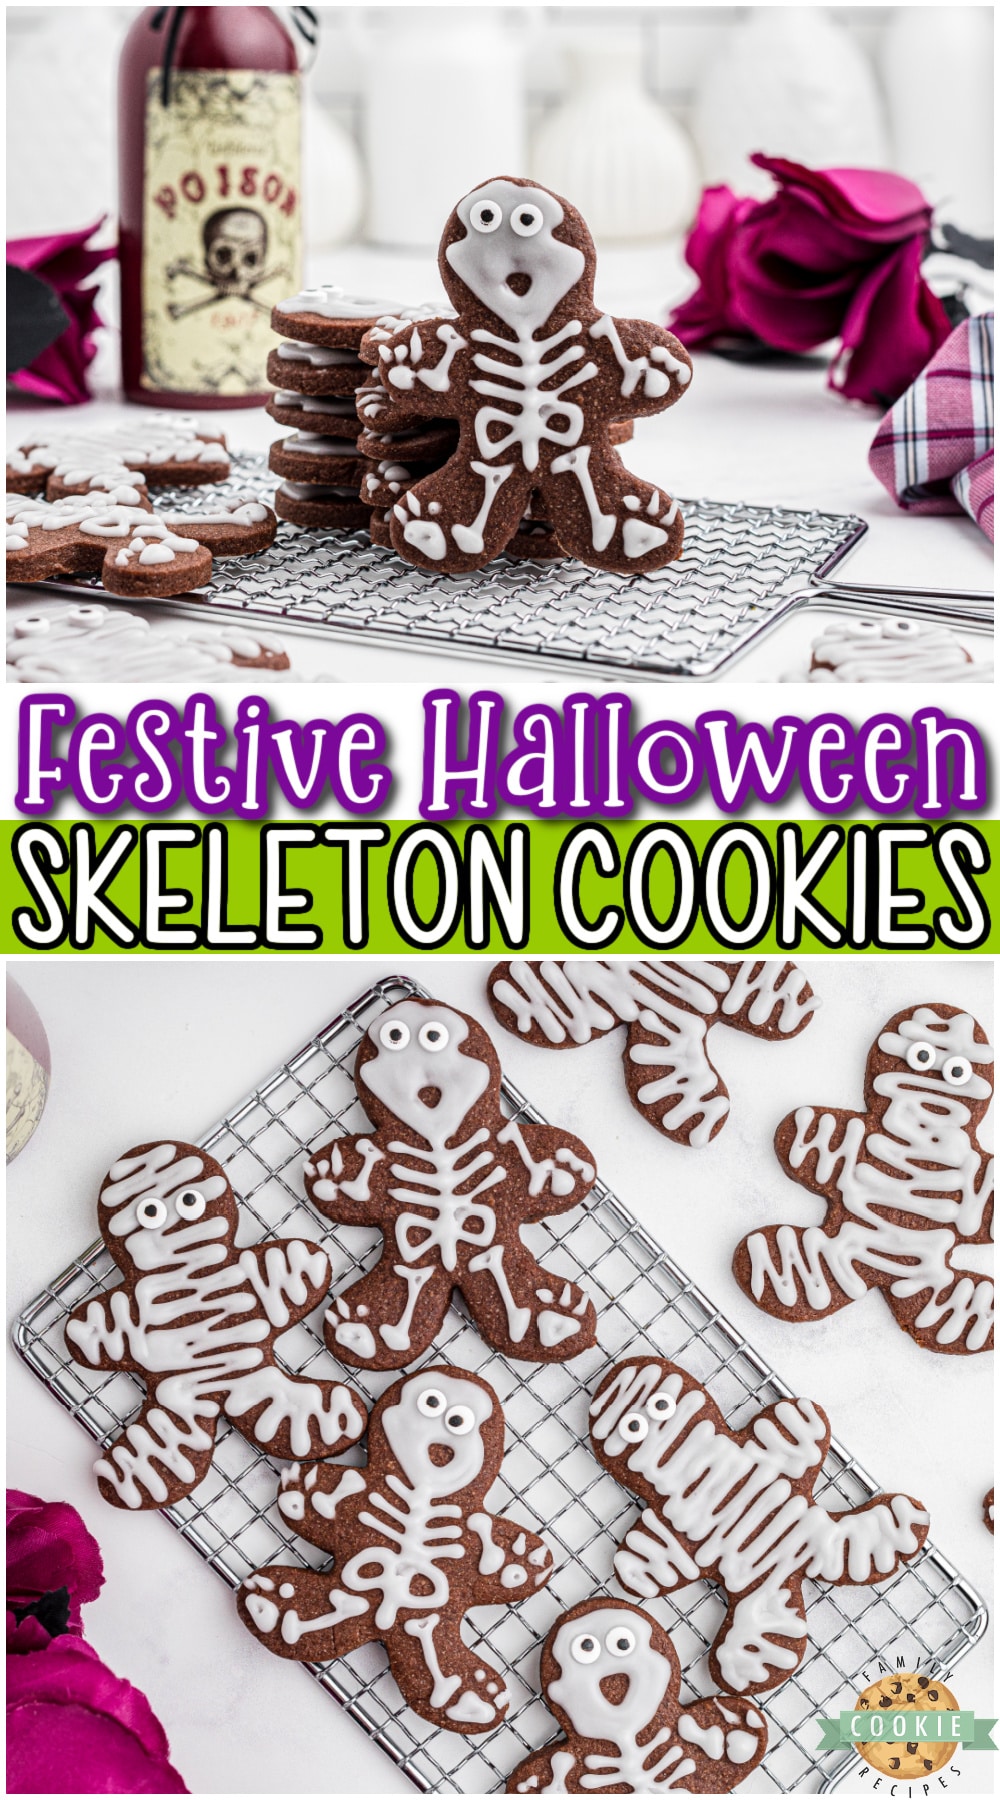 Halloween Skeleton Cookies are festive & fun chocolate sugar cookies decorated in a perfectly creepy way! Simple cut-out skeleton cookies that are fun to make & enjoy!  via @buttergirls